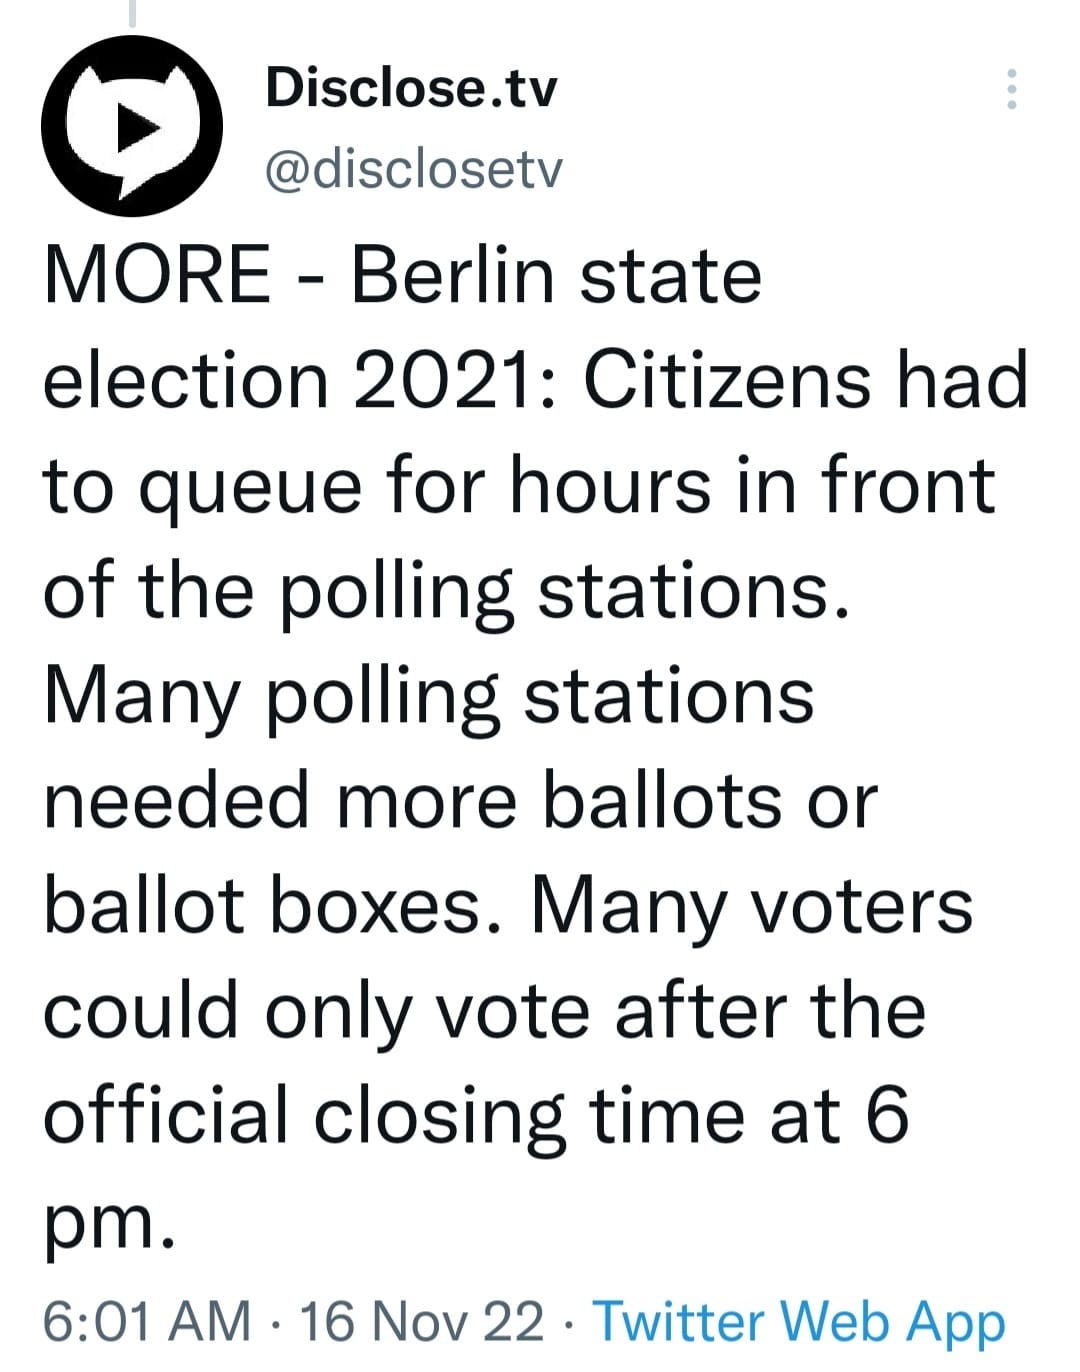 May be an image of text that says 'Disclose.tv @disclosetv MORE Berlin state election 2021: Citizens had to queue for hours in front of the polling stations. Many polling stations needed more ballots or ballot boxes. Many voters could only vote after the official closing time at 6 pm. 6:01 AM 16 16 Nov 22 Twitter Web App'